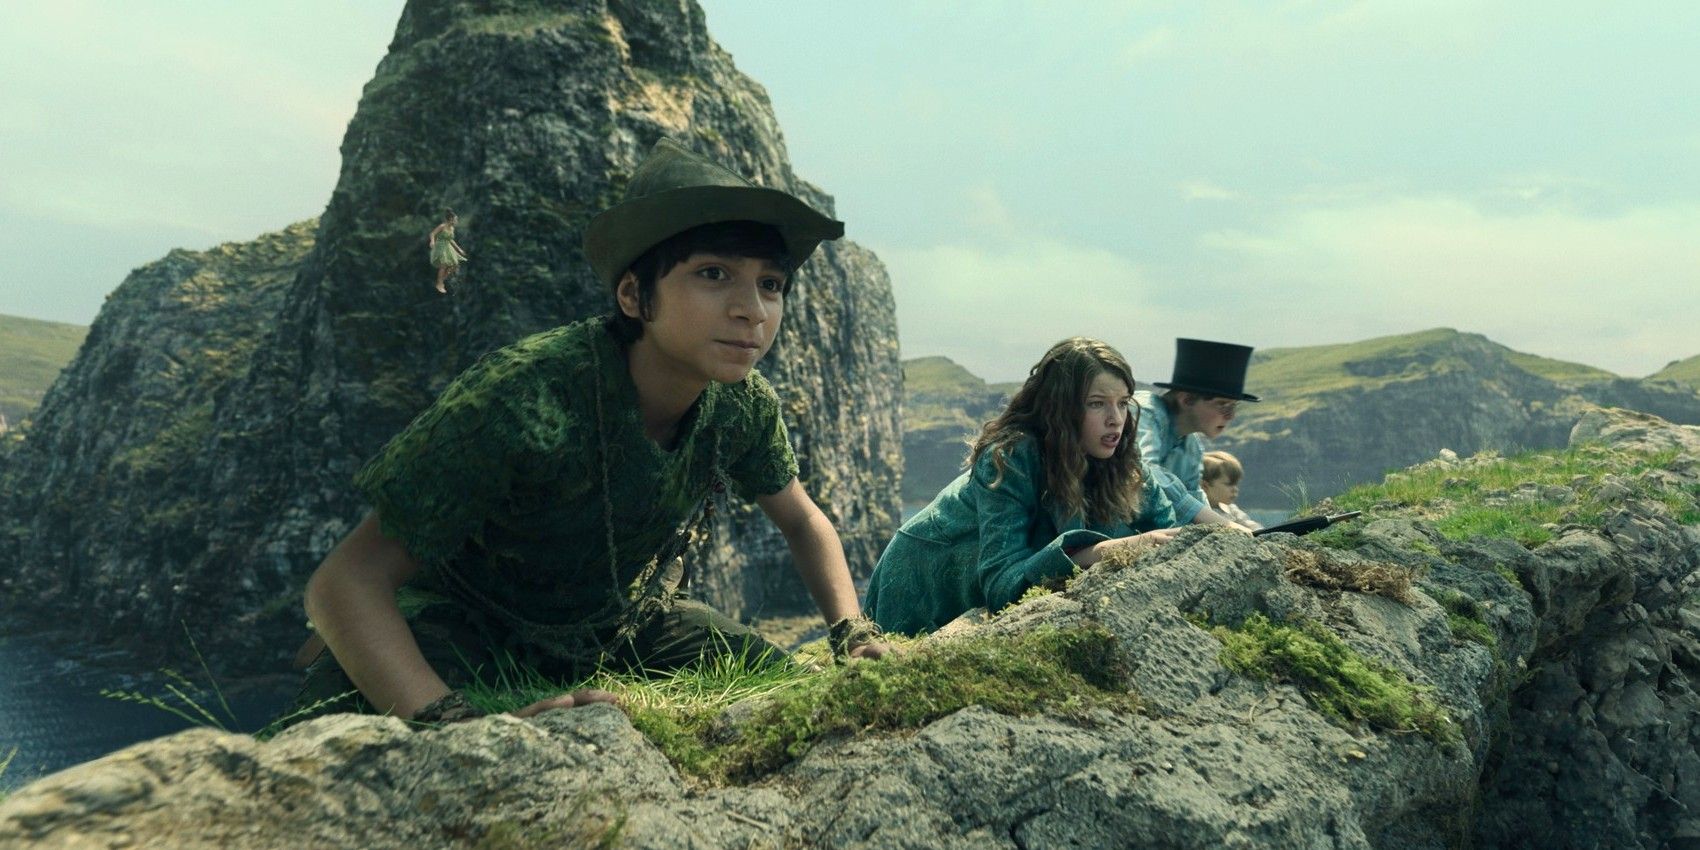 Alexander Molony, Ever Anderson, Joshua Pickering, and Jacobi Jupe in live-action remake Peter Pan and Wendy